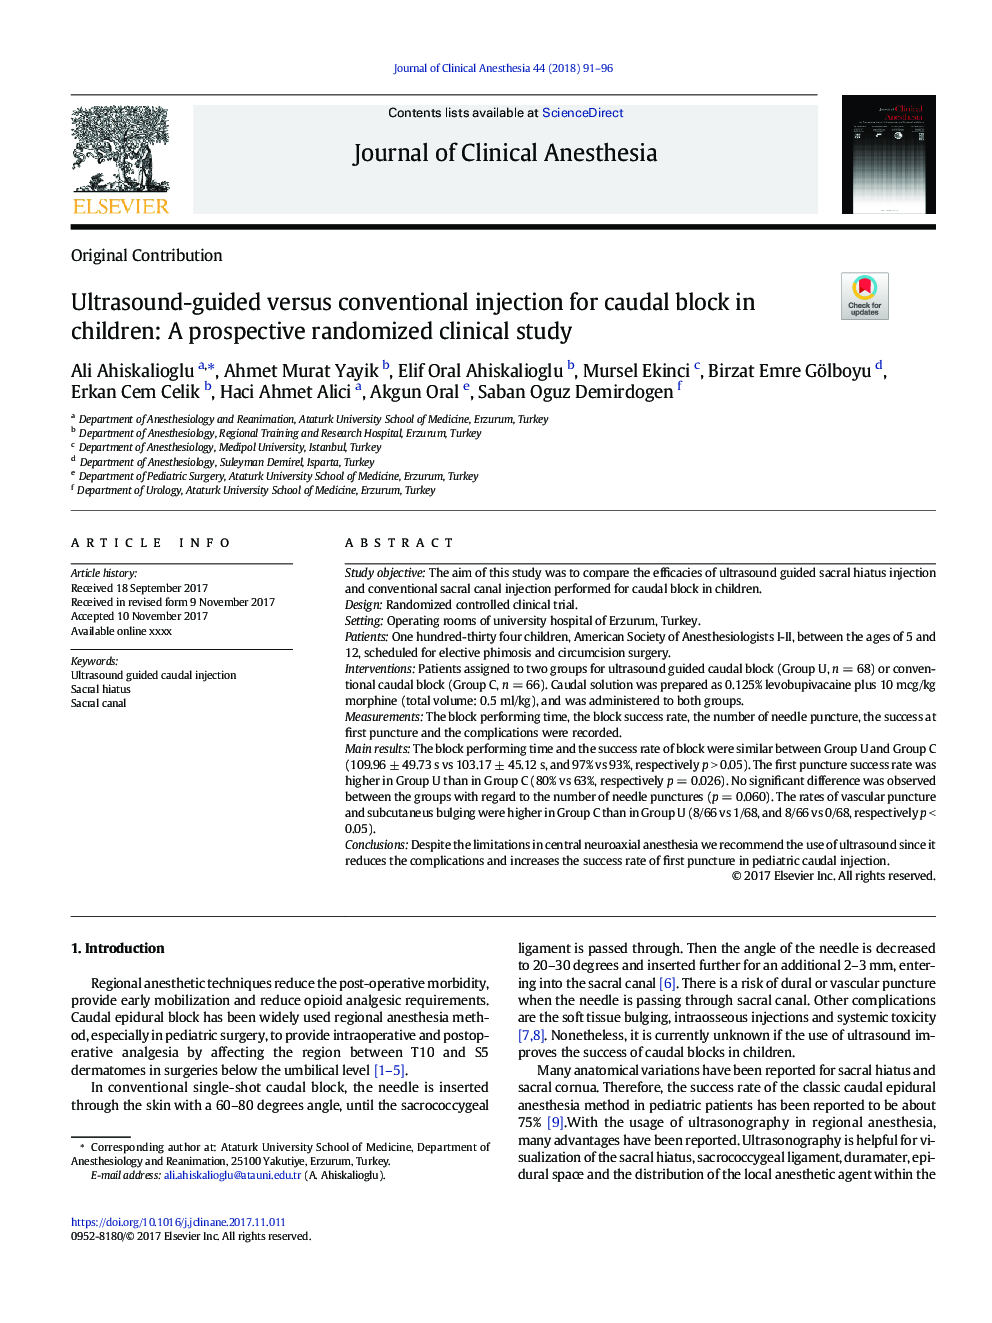 Ultrasound-guided versus conventional injection for caudal block in children: A prospective randomized clinical study